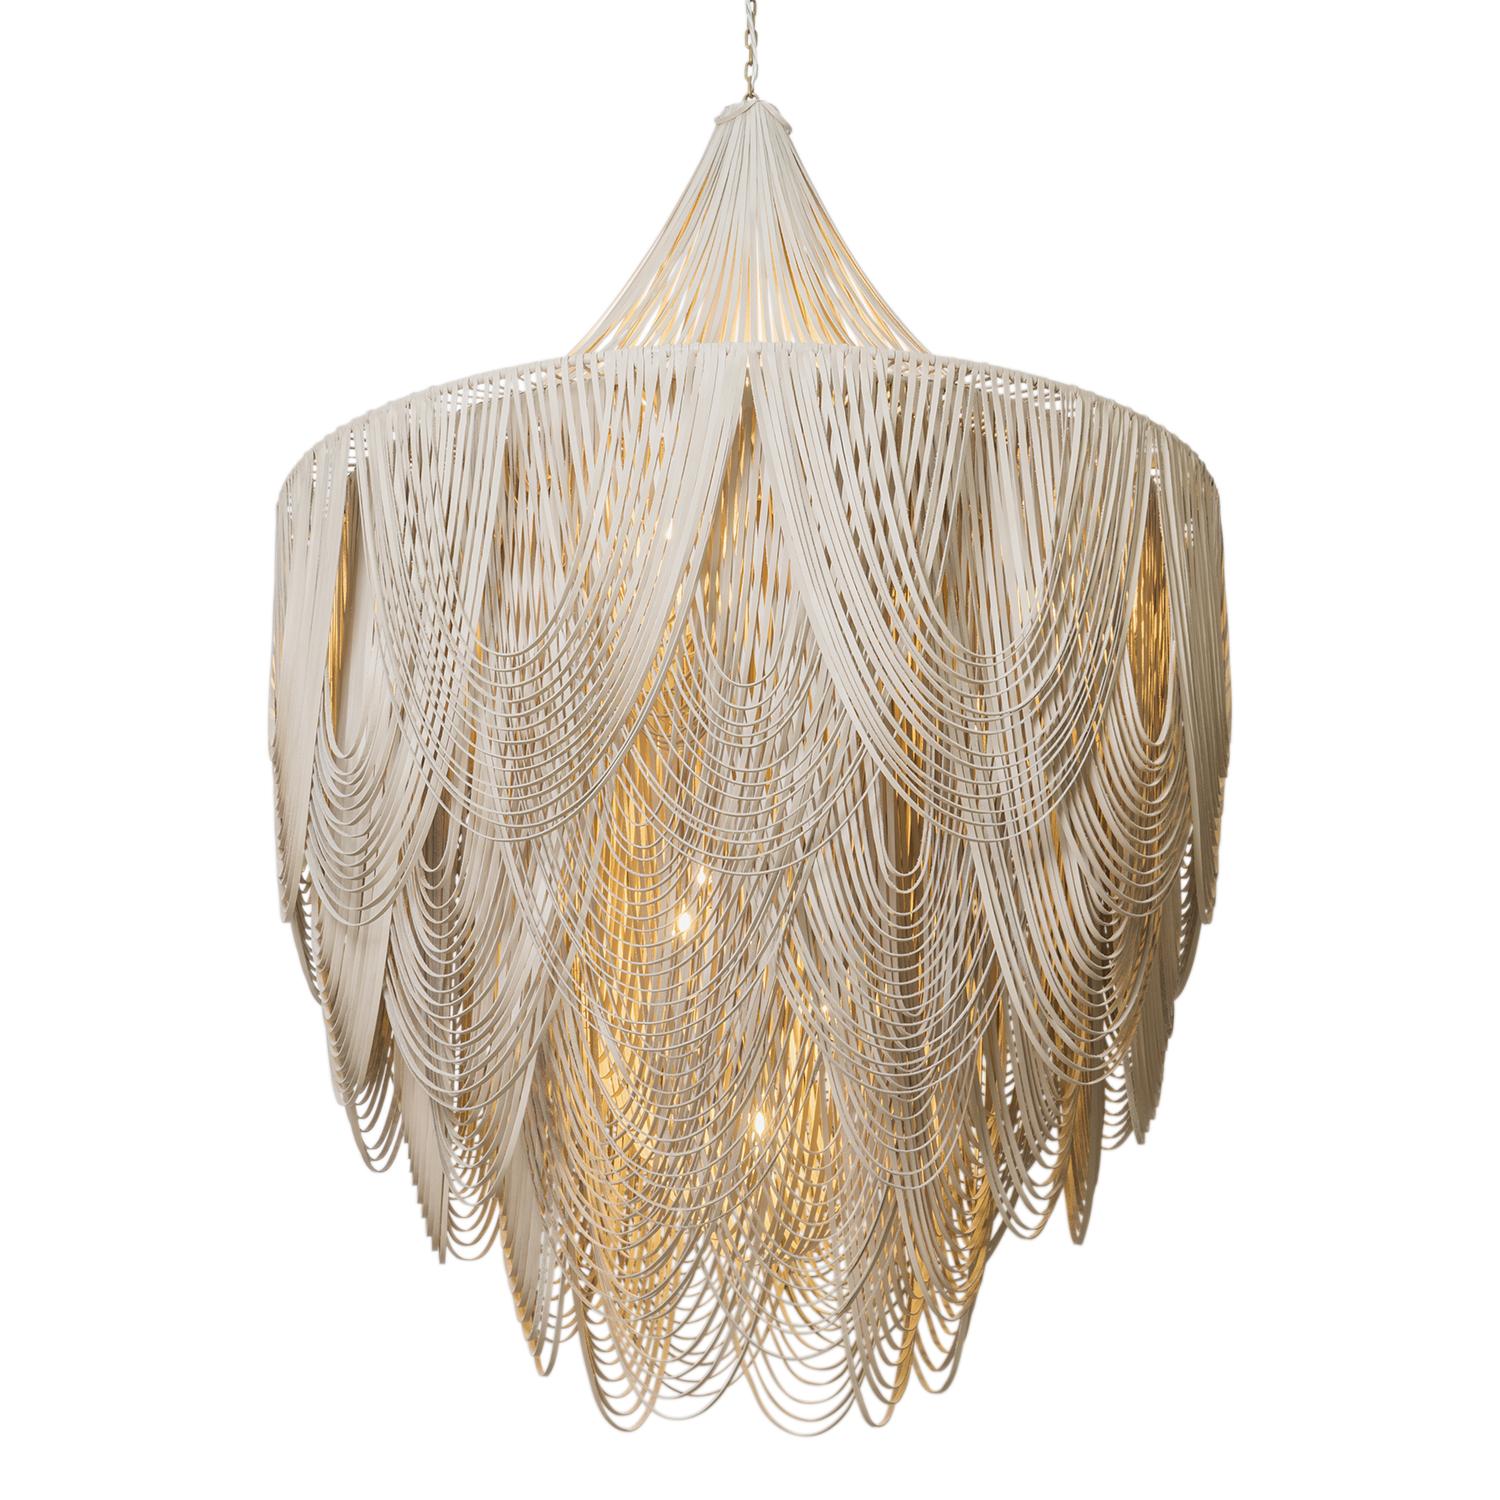 XXL Round Whisper with Crown Leather Chandelier in Cream-Stone Leather